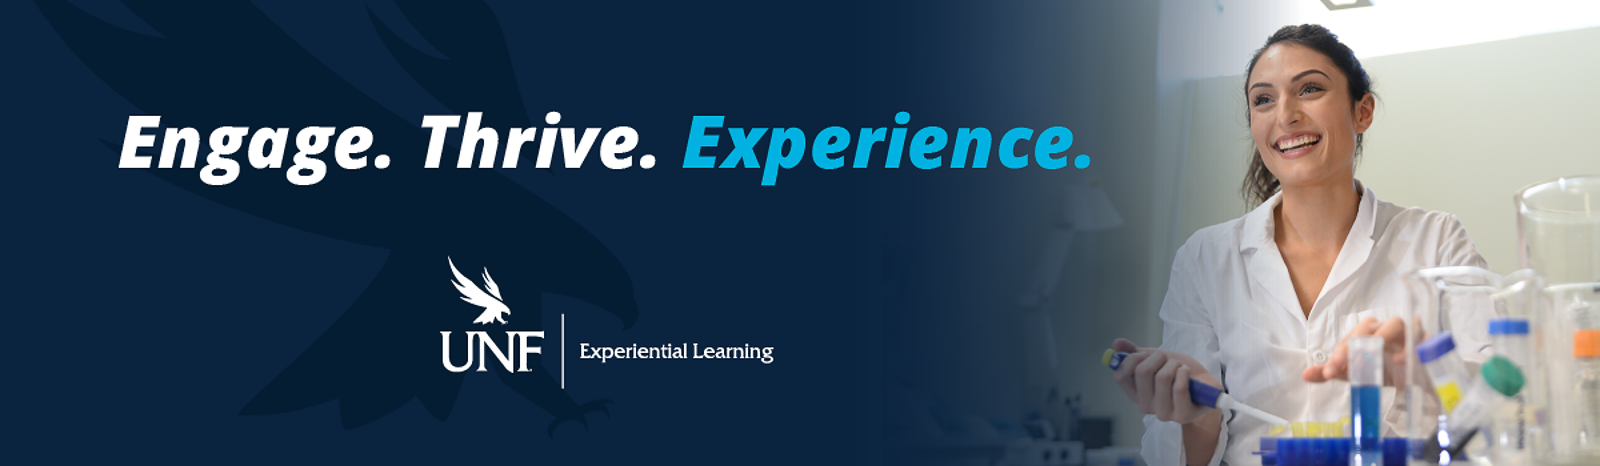 Engage Thrive Experience with UNF logo and a student working in a lab